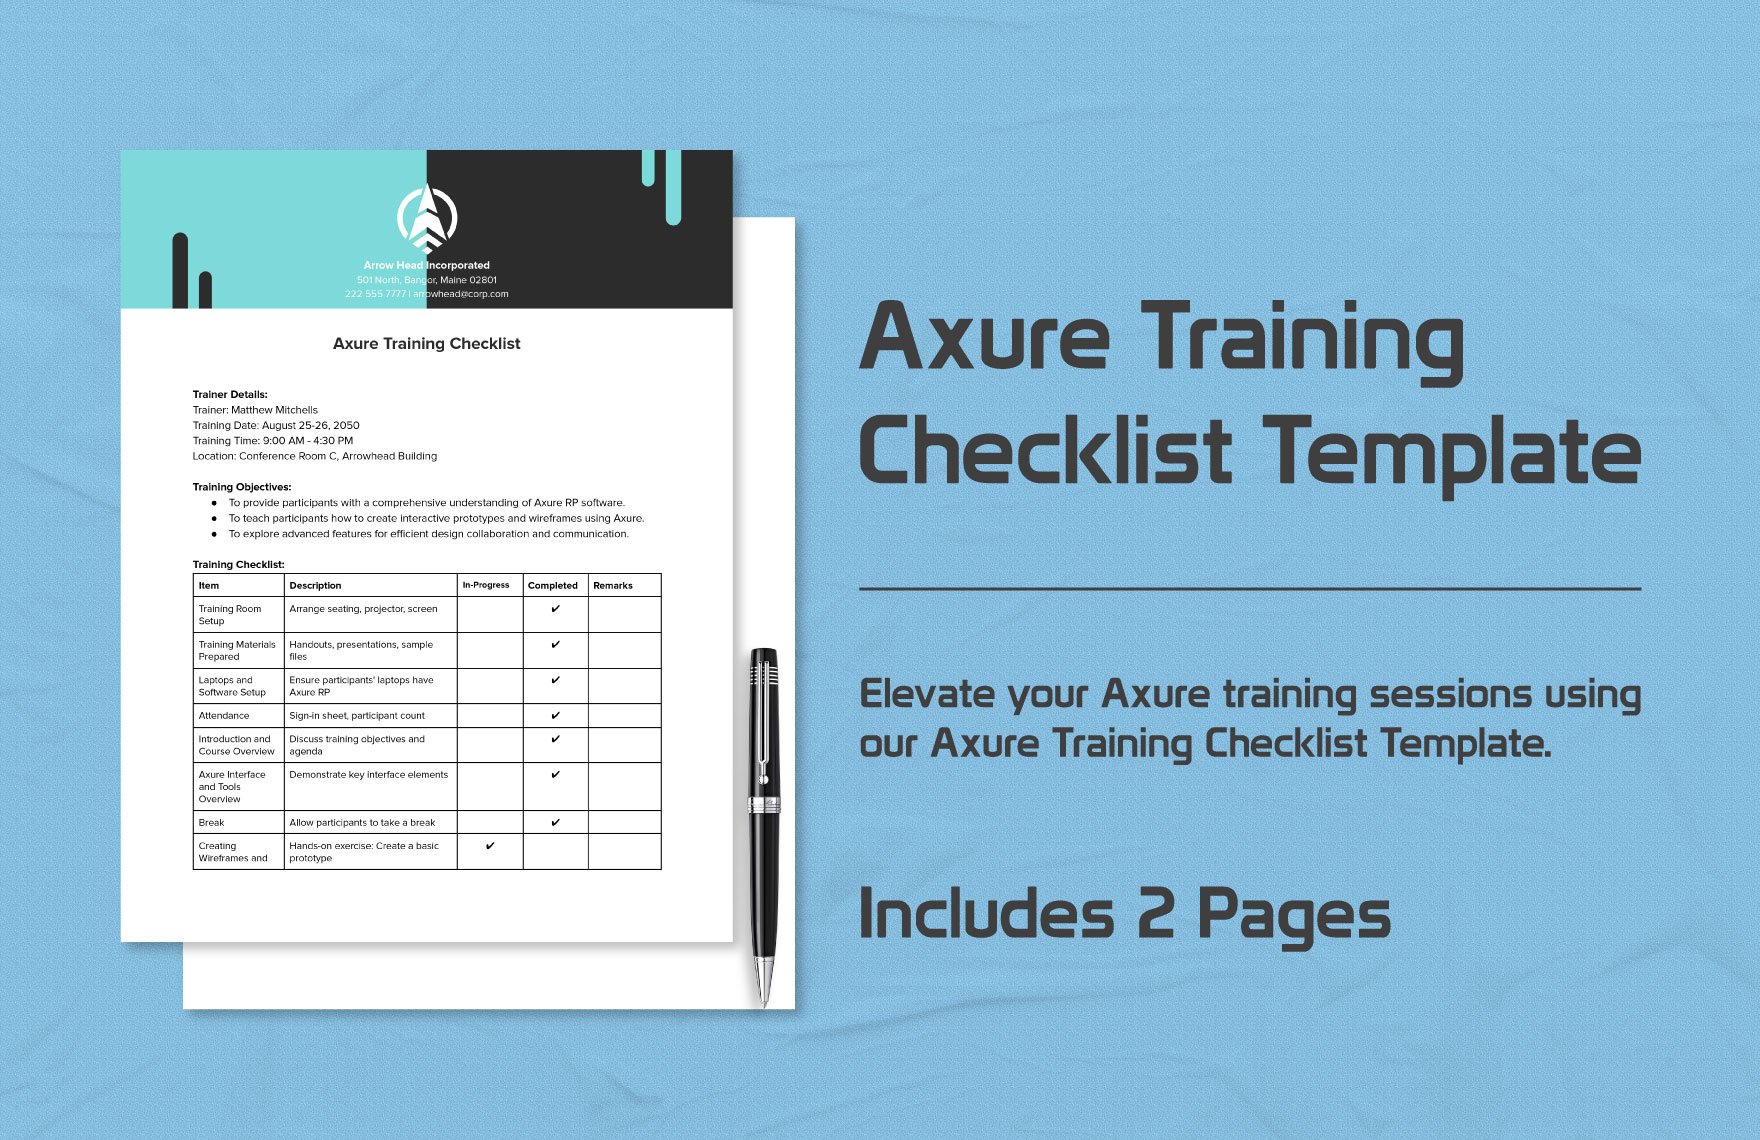 Axure Training Checklist Template